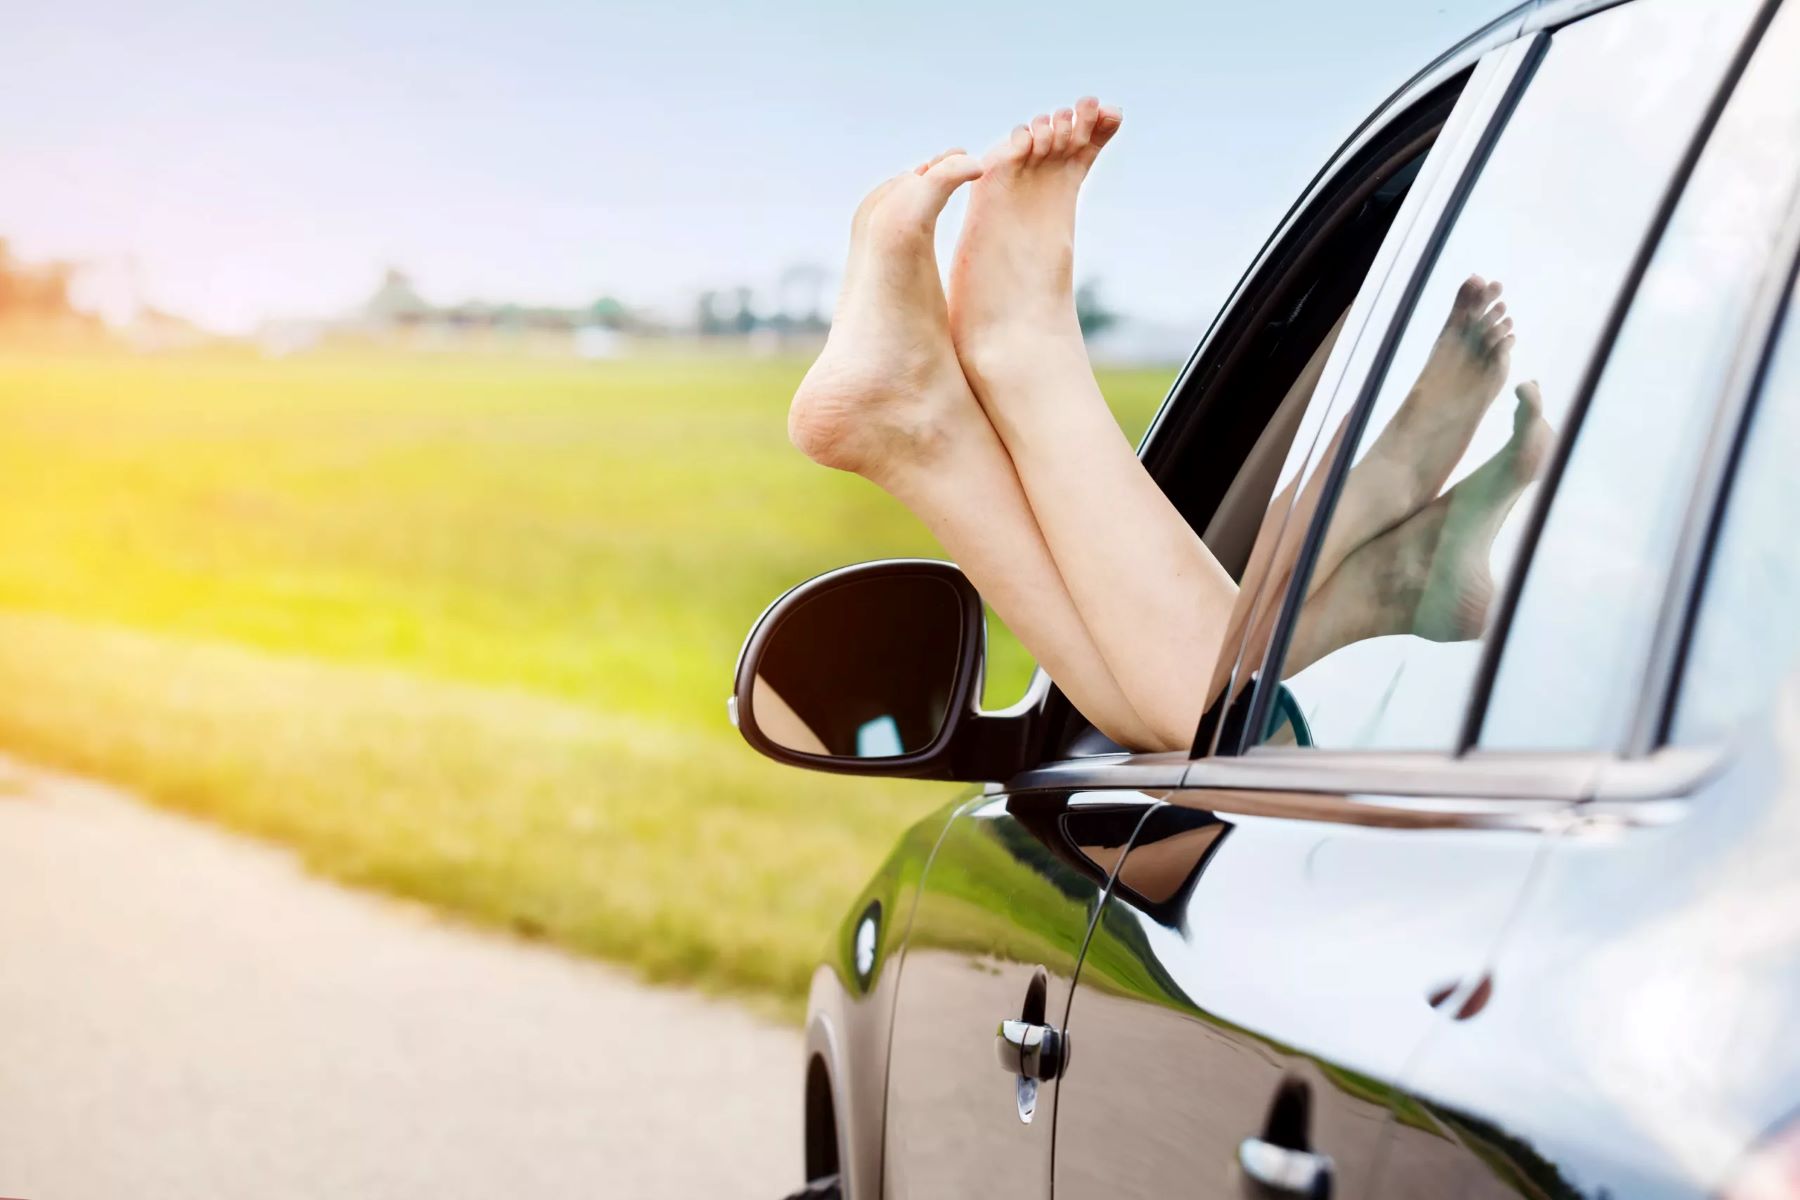 Shocking! Driving With Two Feet In Texas: Is It Illegal?